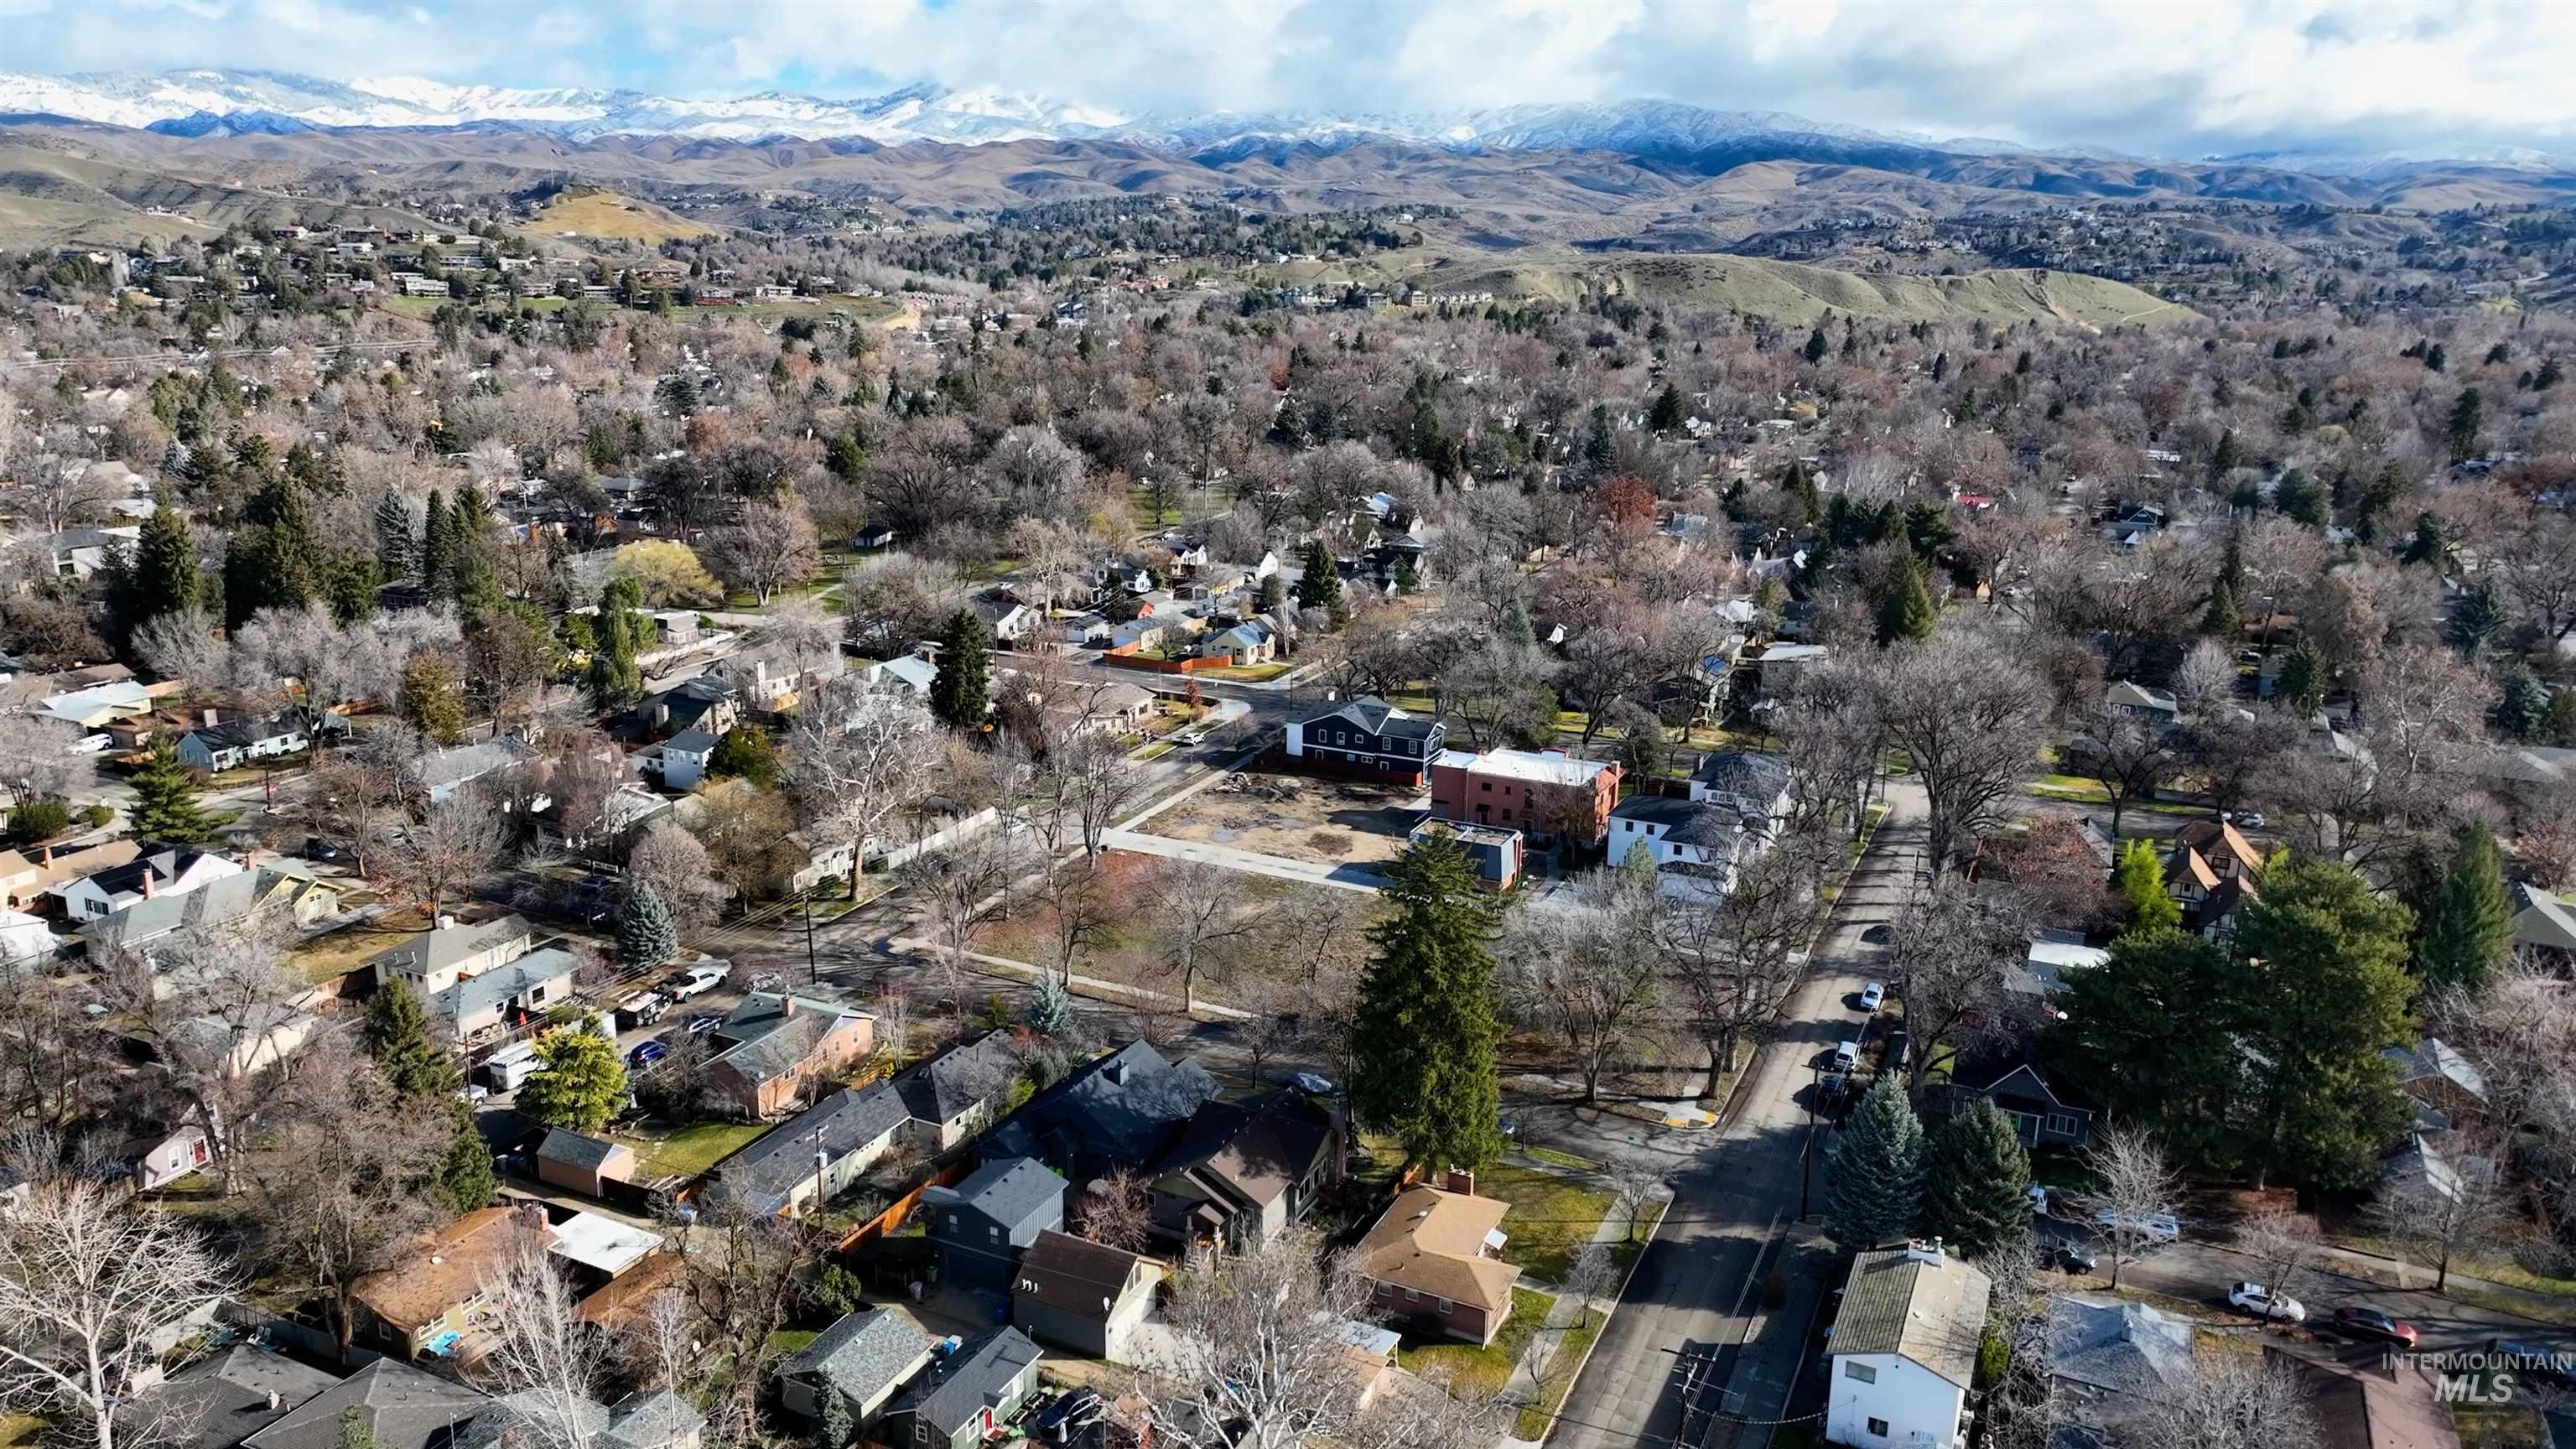 1600 N 25th St., Boise, Idaho 83702, Land For Sale, Price $495,000,MLS 98902345